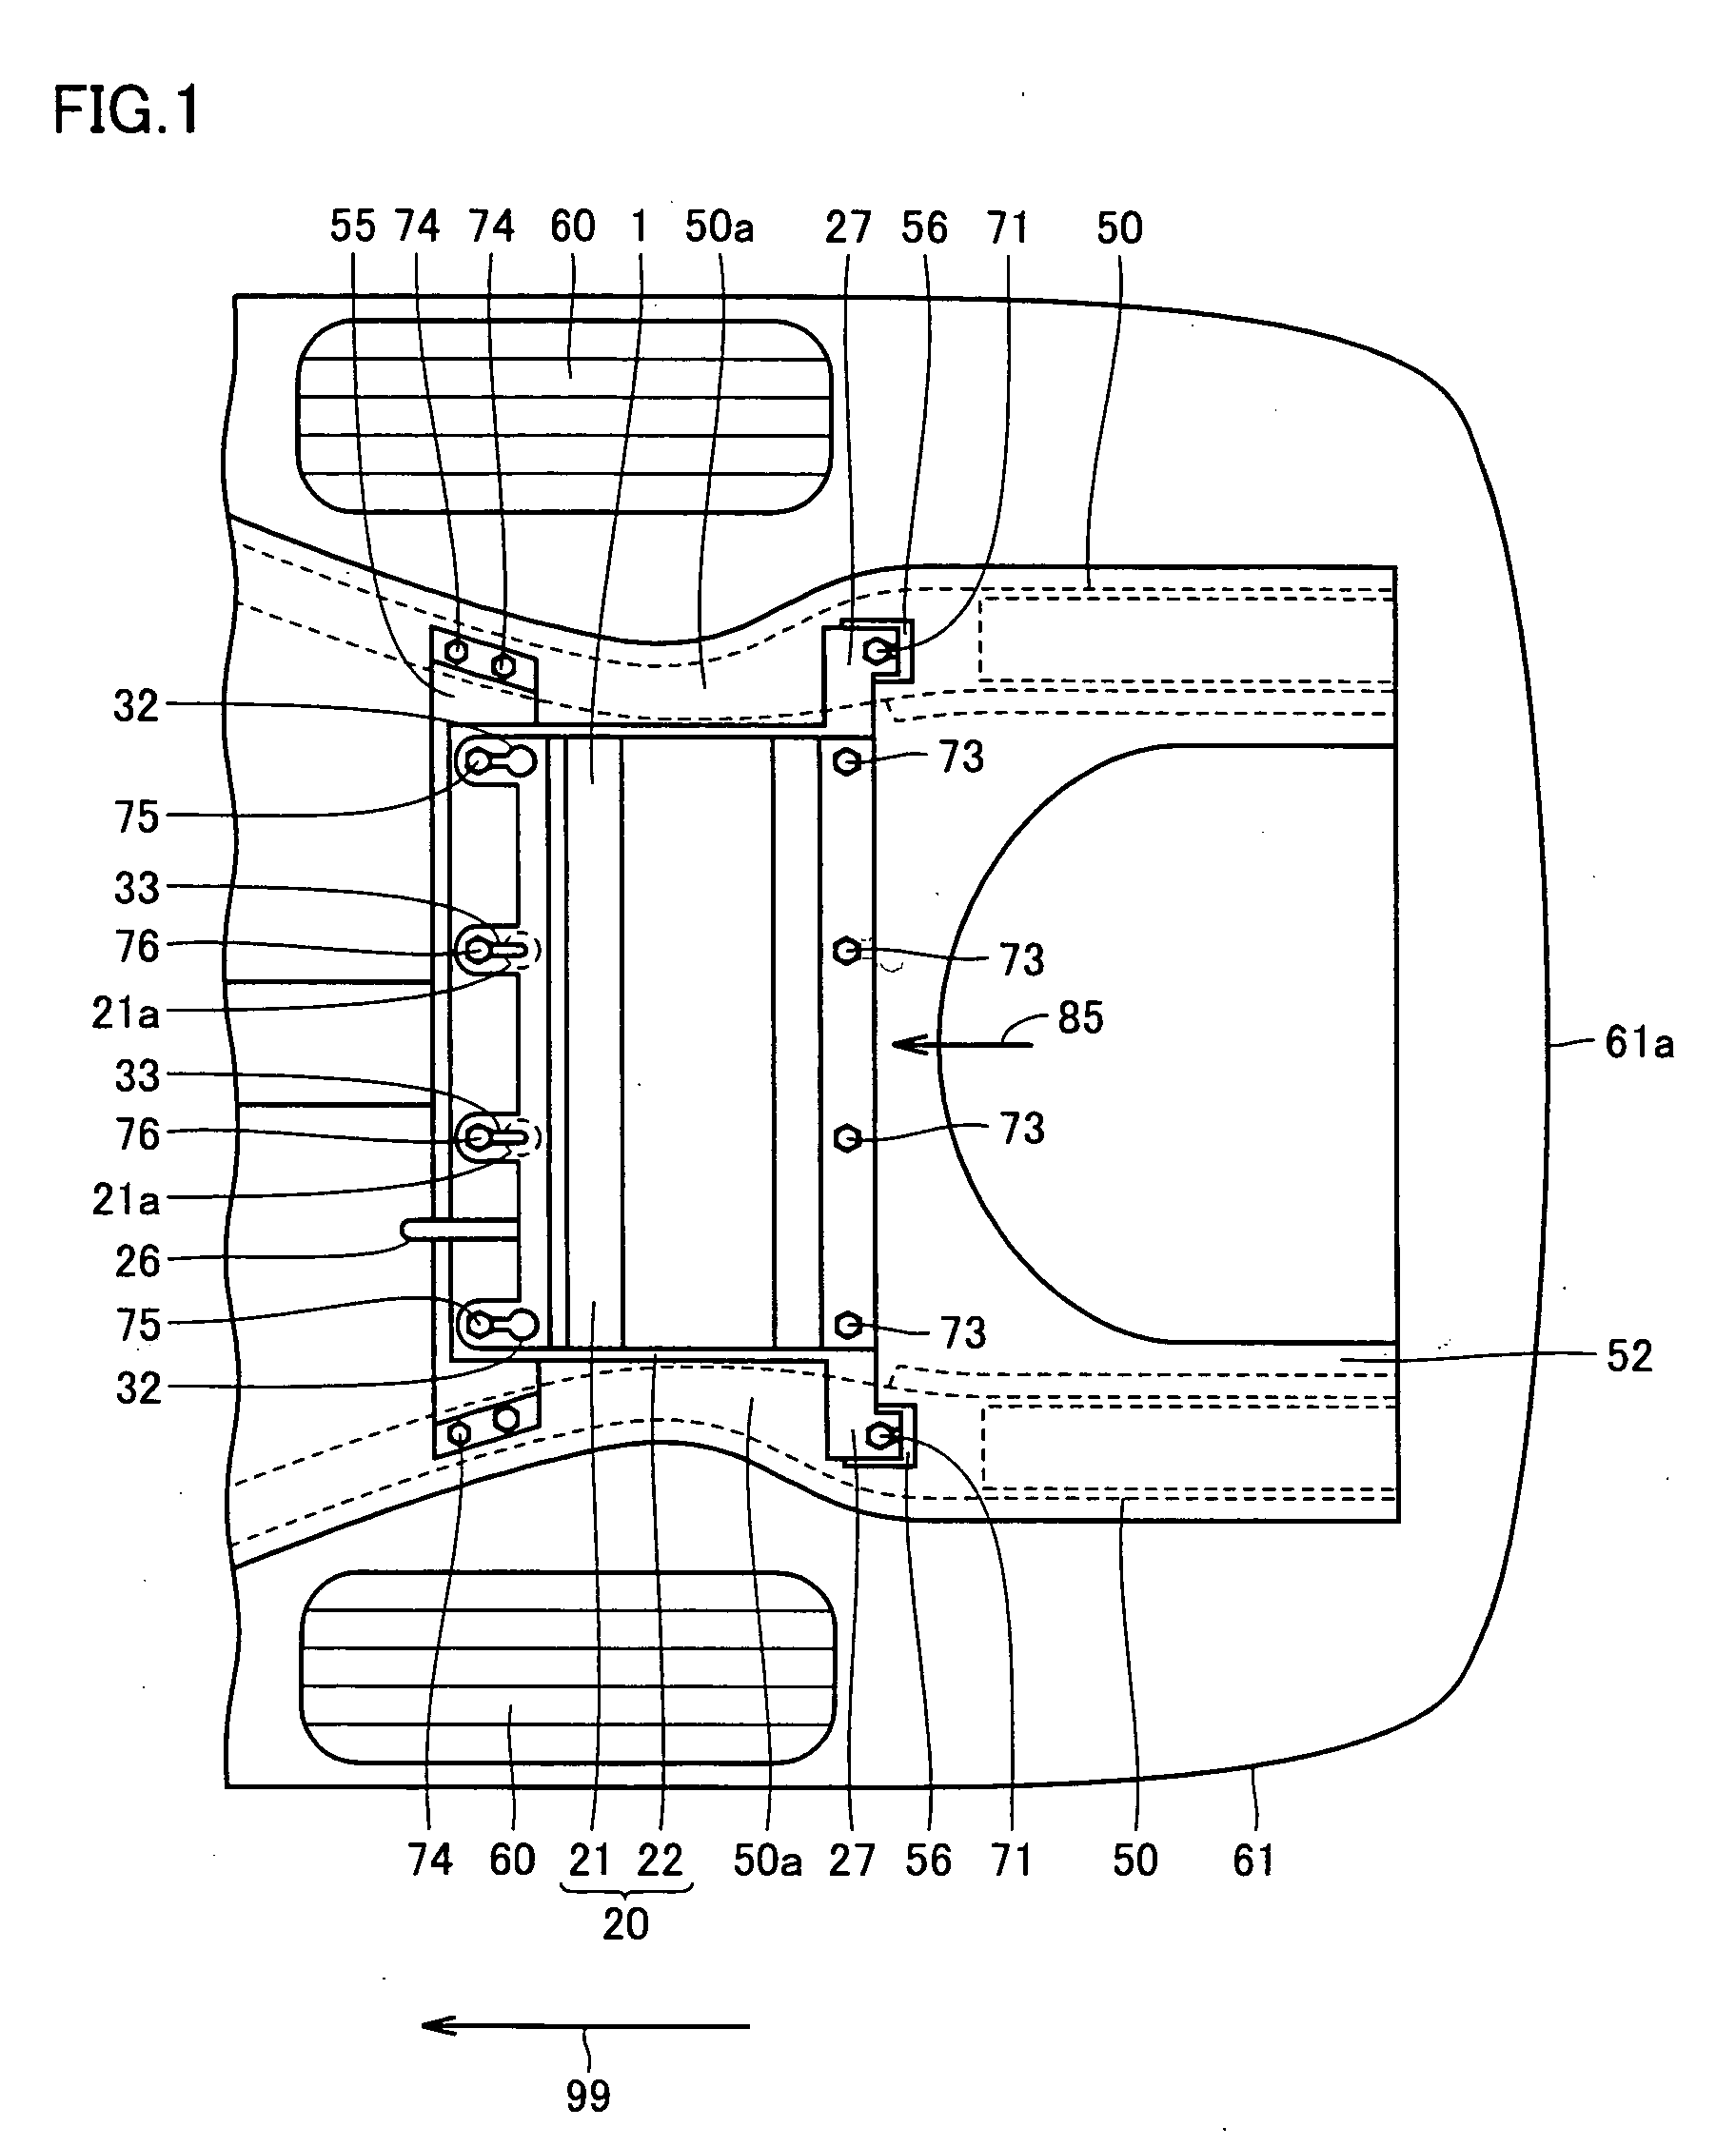 Structure for Mounting Electricity Storage Pack on Vehicle